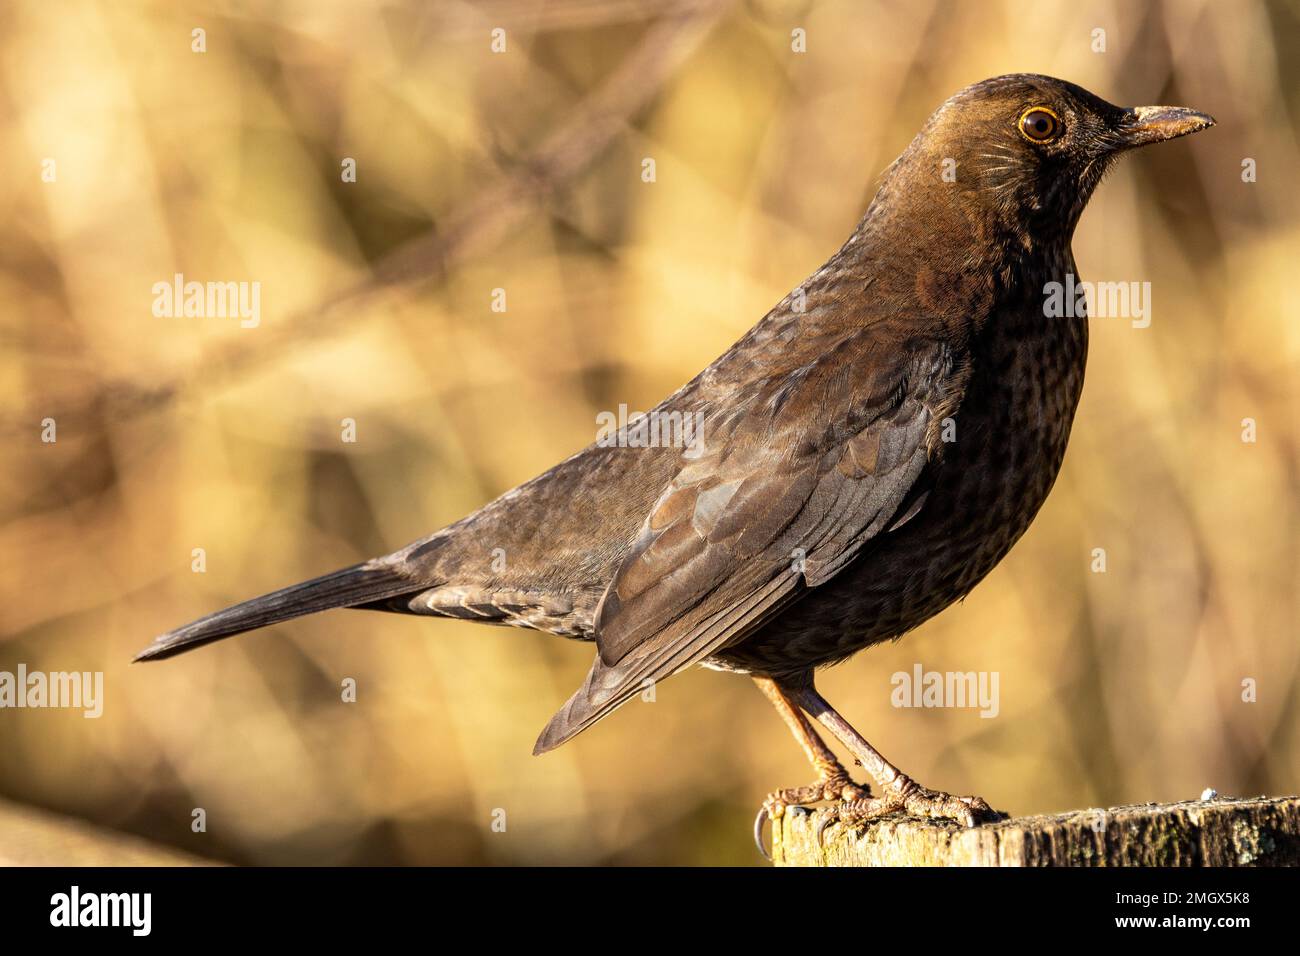 The female Blackbird is less strikingly marked than the cock bird. This allows her to remain much better hidden when on the nest incubation her eggs. Stock Photo